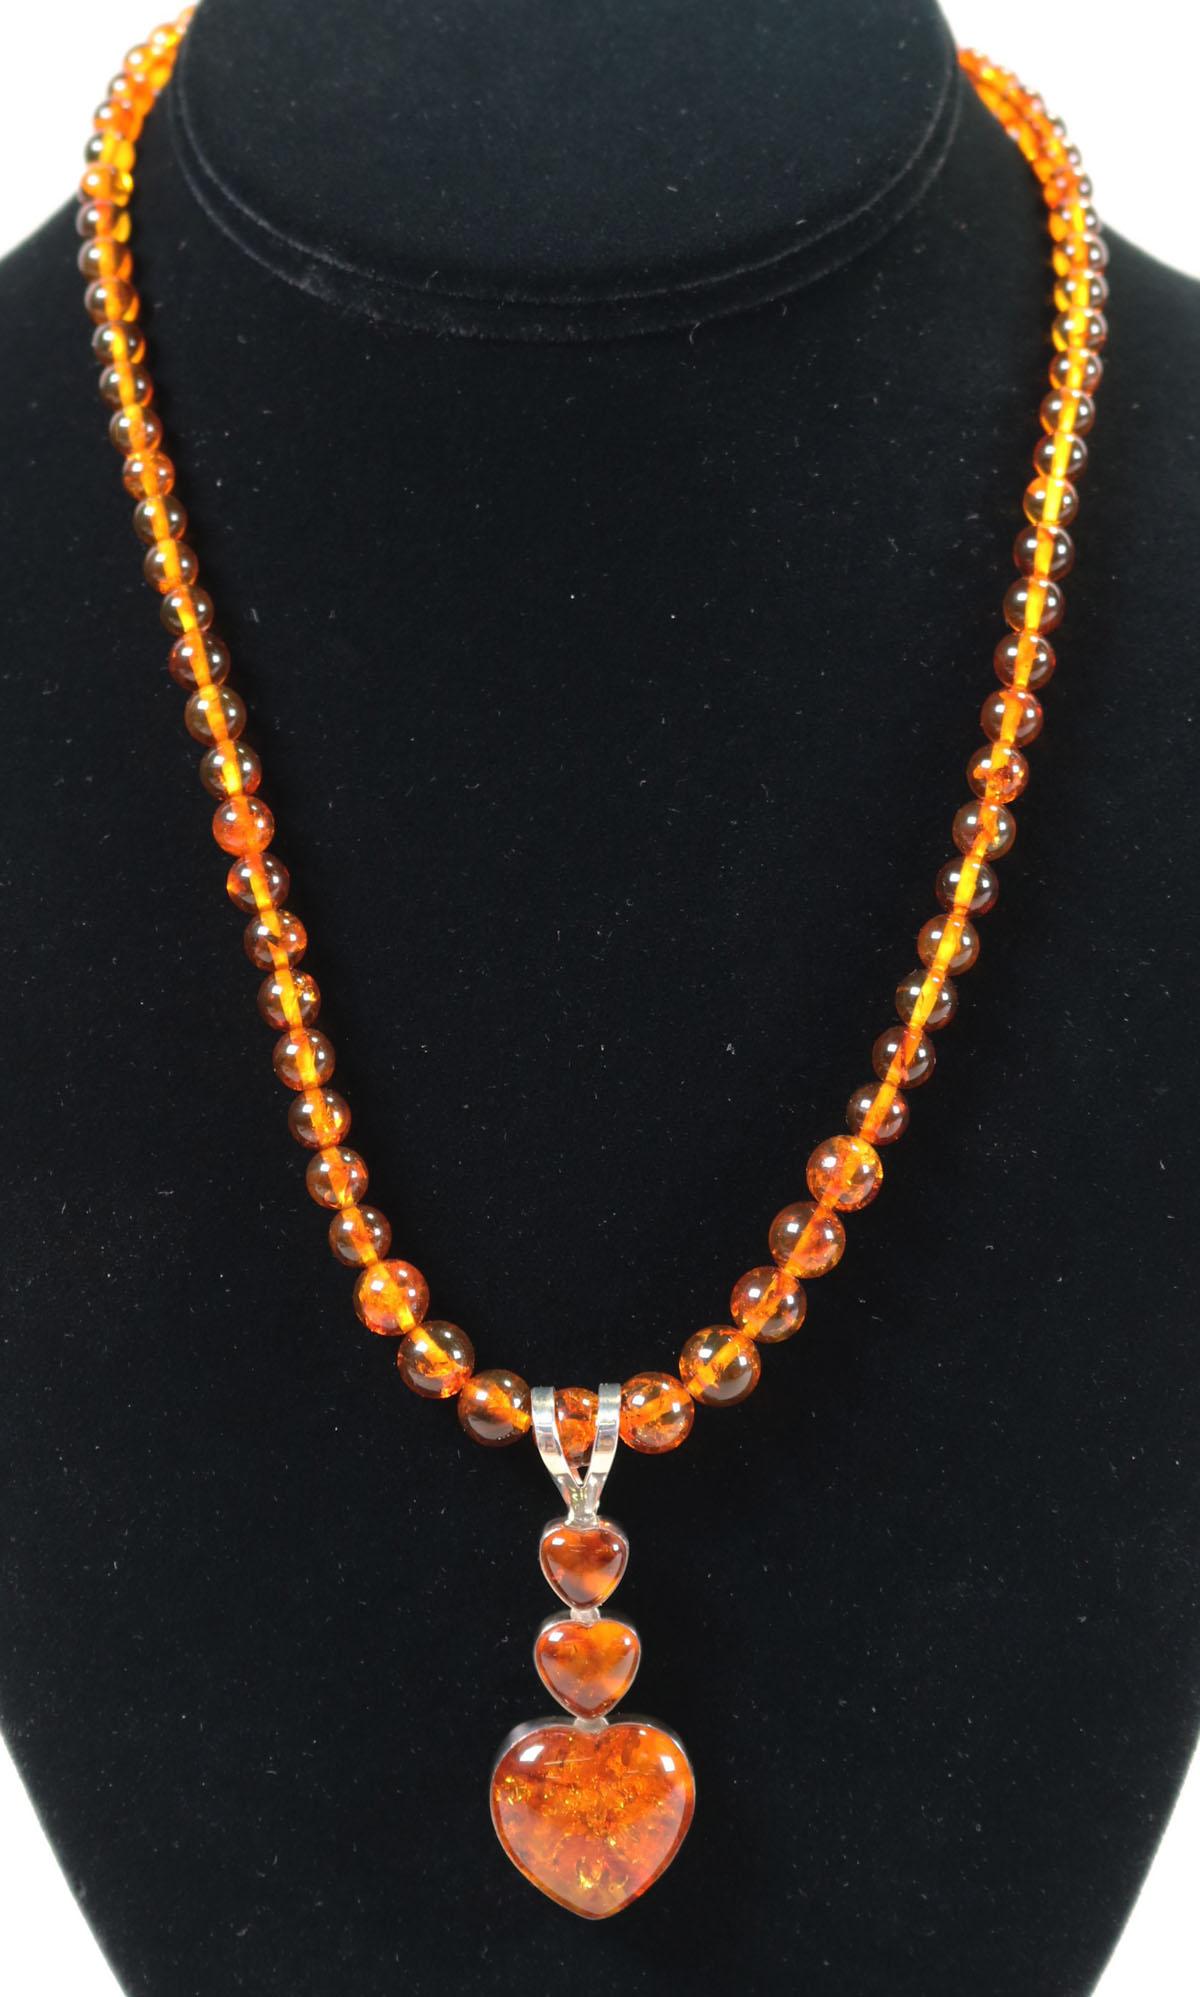 Amber Color Necklace & Amber Color Heart Pendant